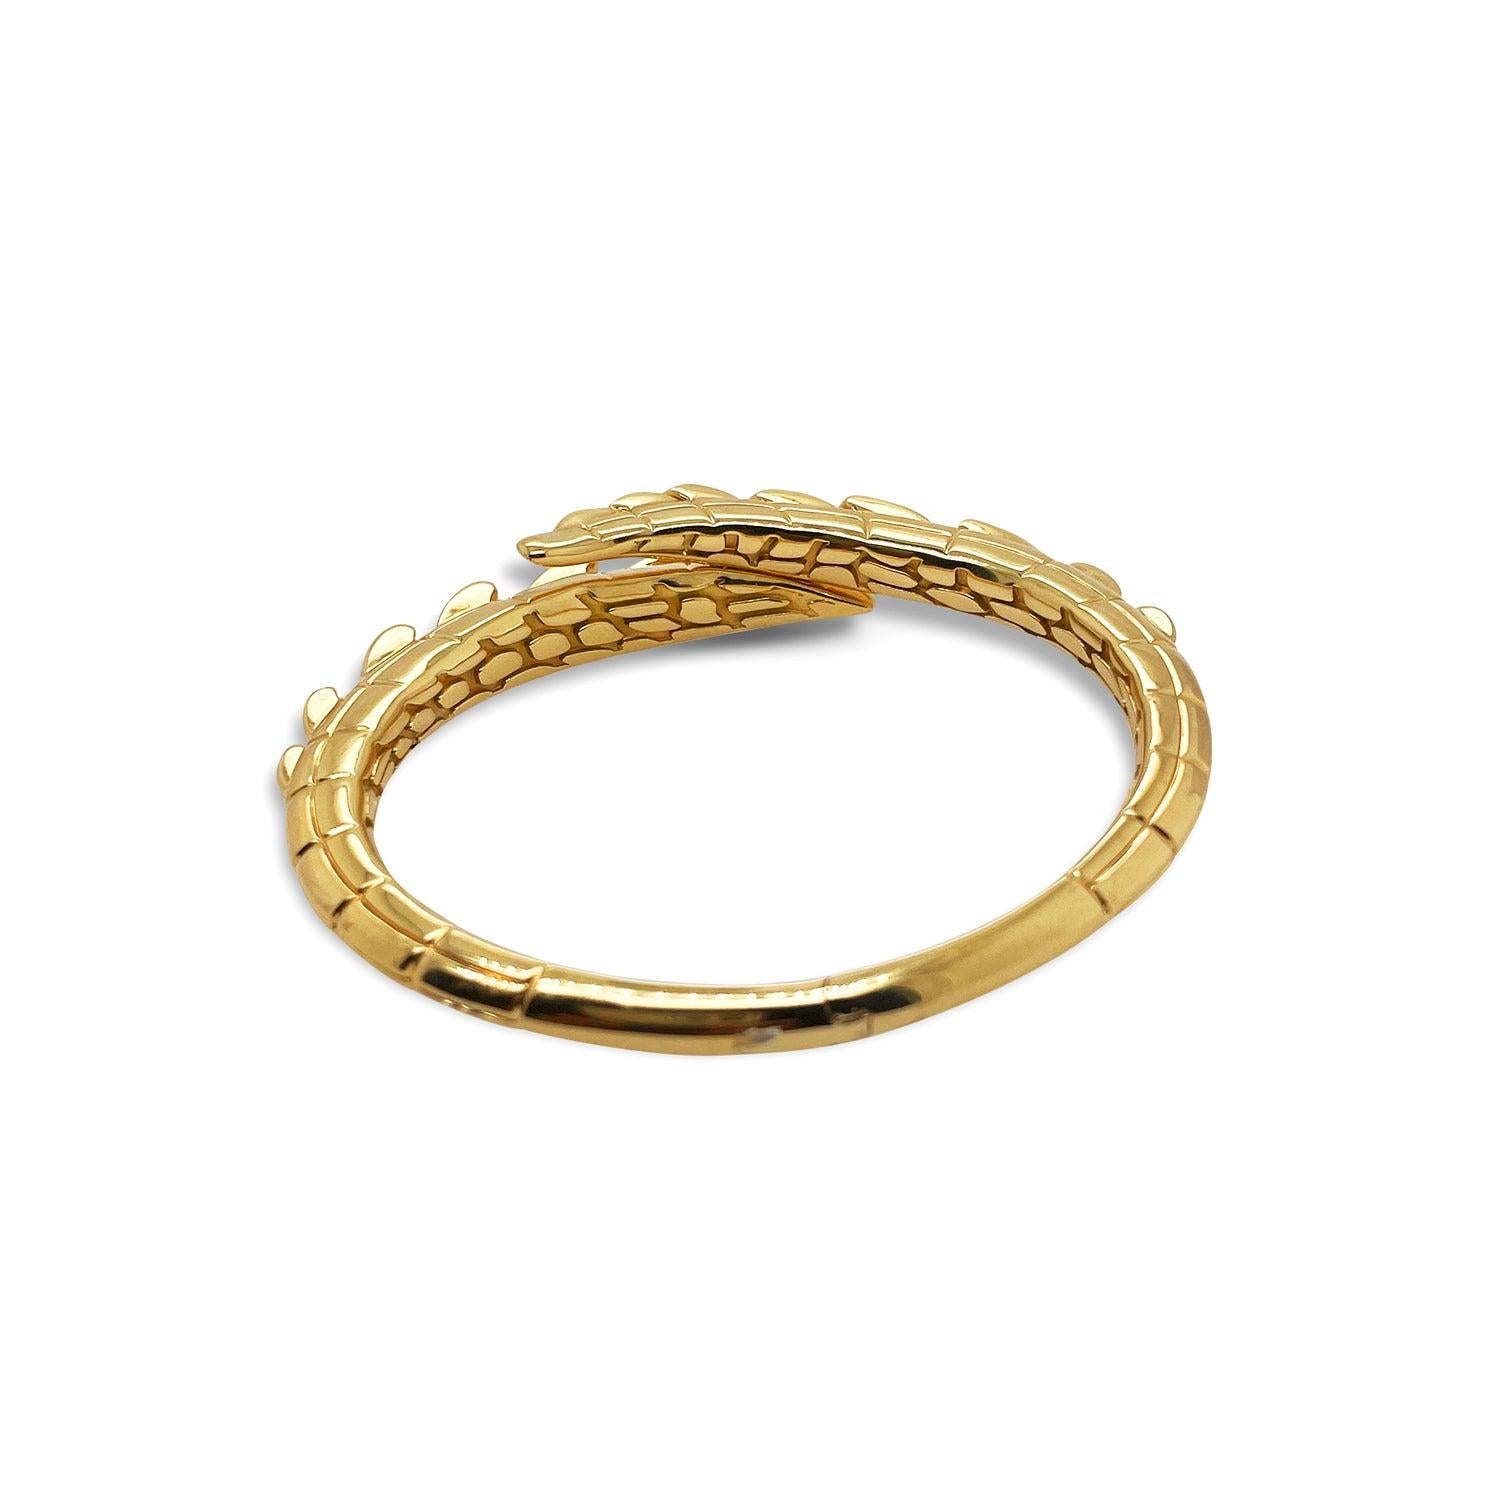 The Croc Tail Cuff Bangle in 18ct Yellow Gold For Sale 2